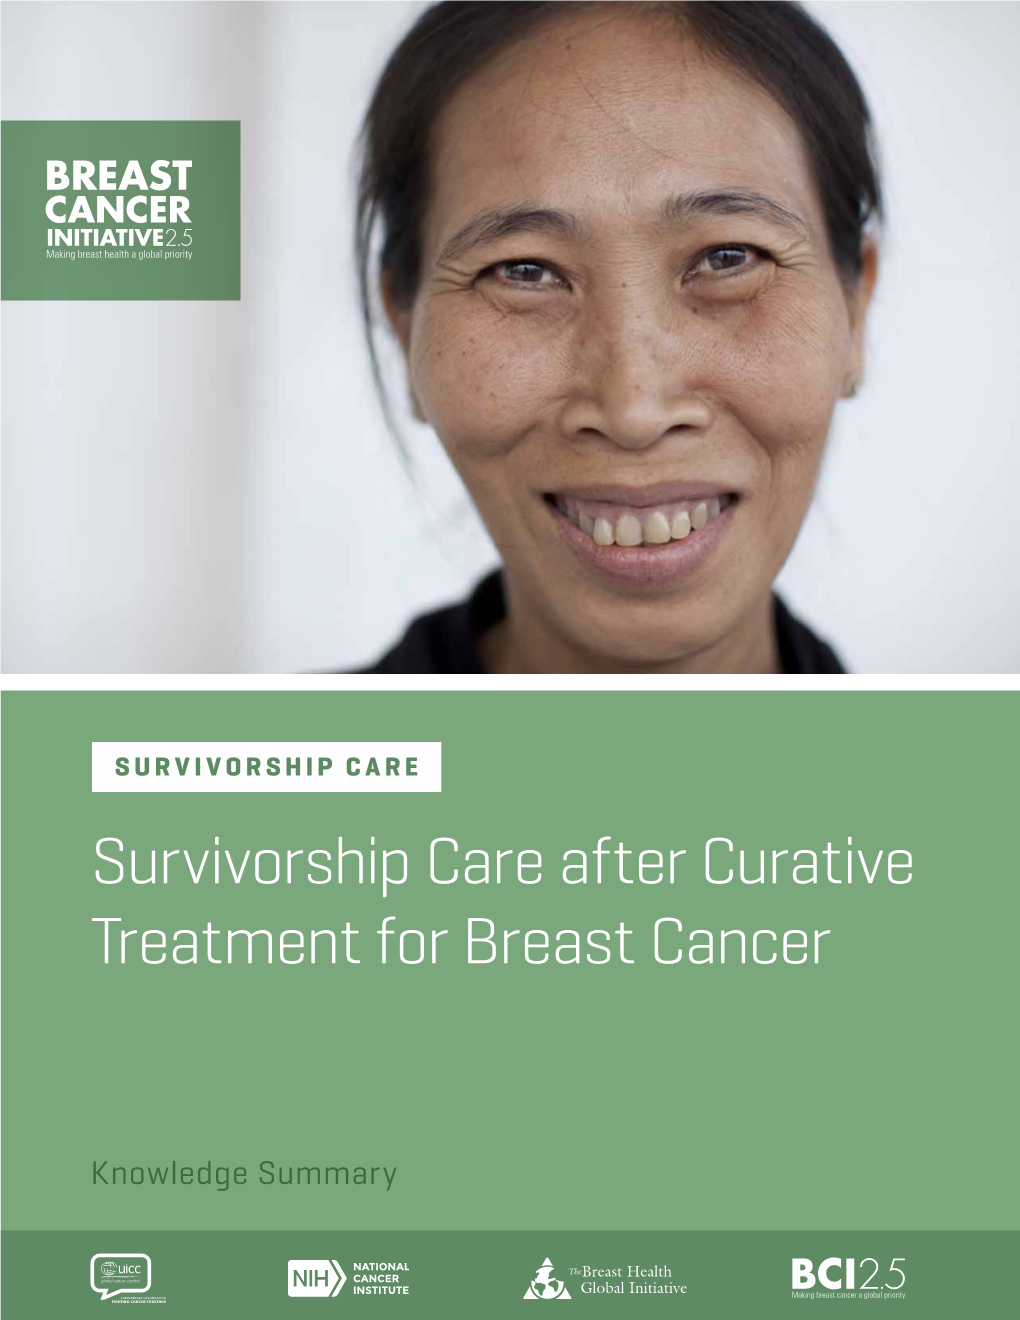 Survivorship Care After Curative Treatment for Breast Cancer